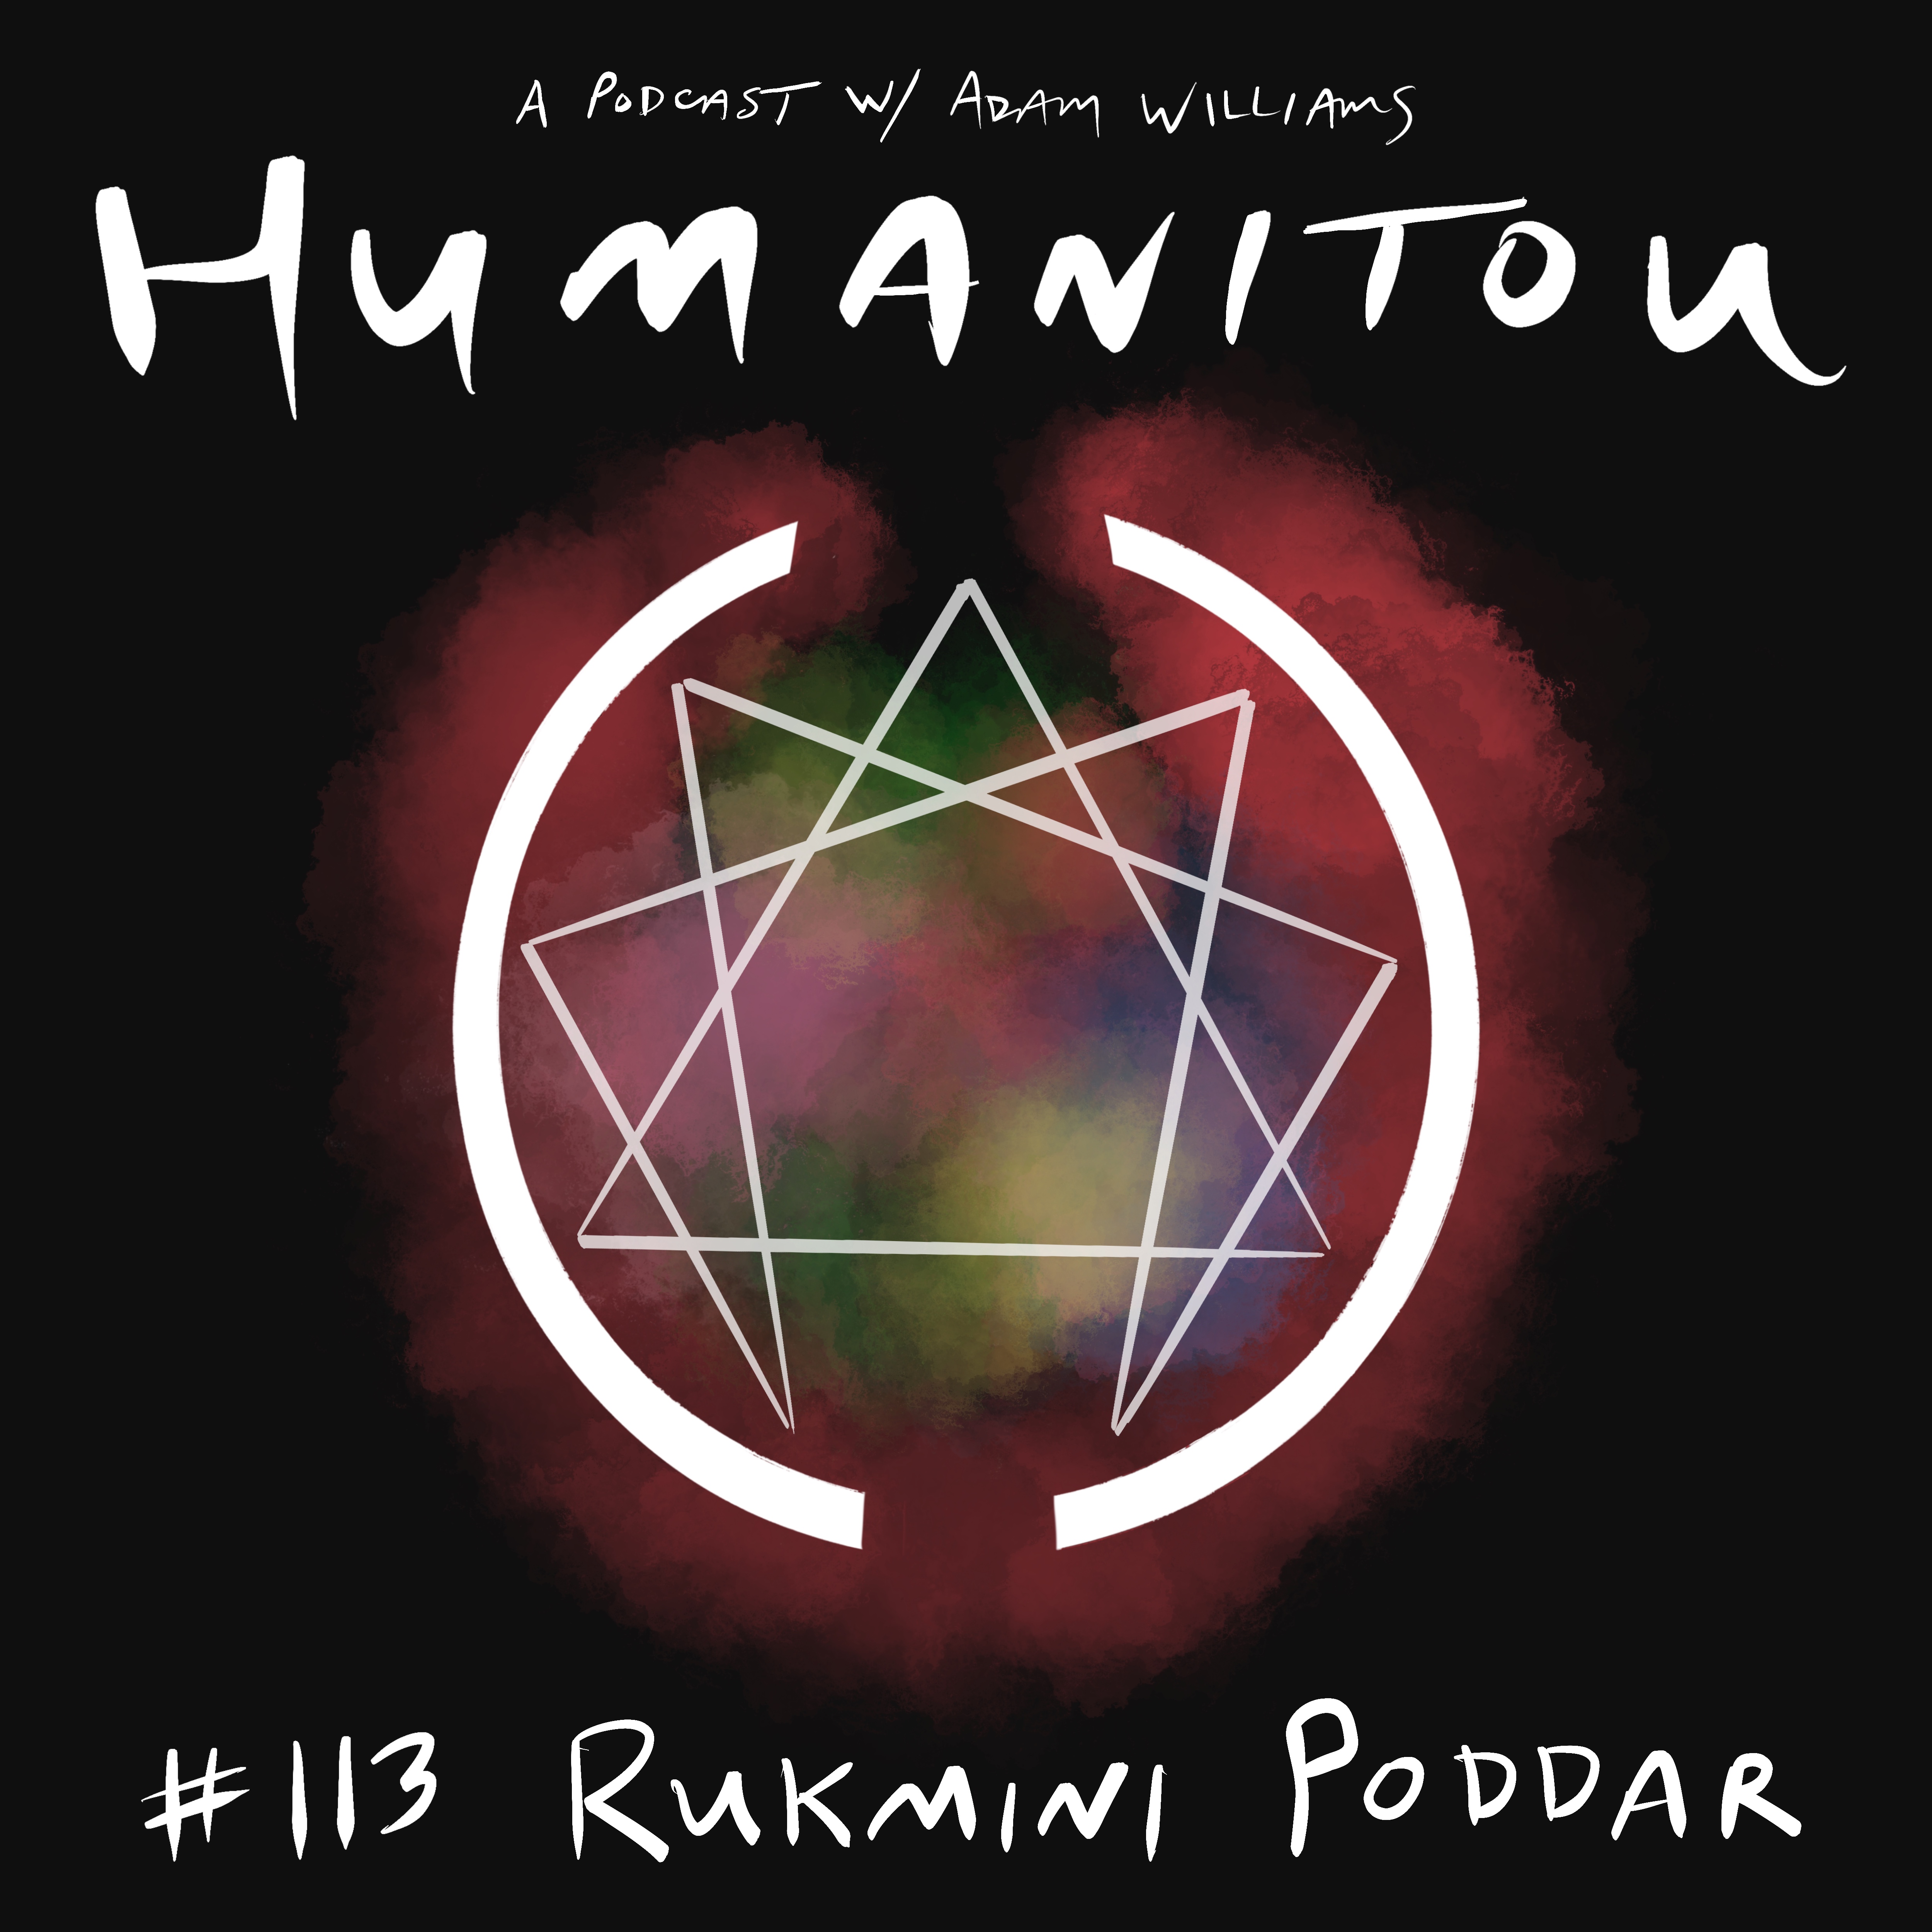 113: Rukmini Poddar, artist & illustrator, on 'Obscure Emotions,' the relationship of spirituality and creativity, and essence seeking